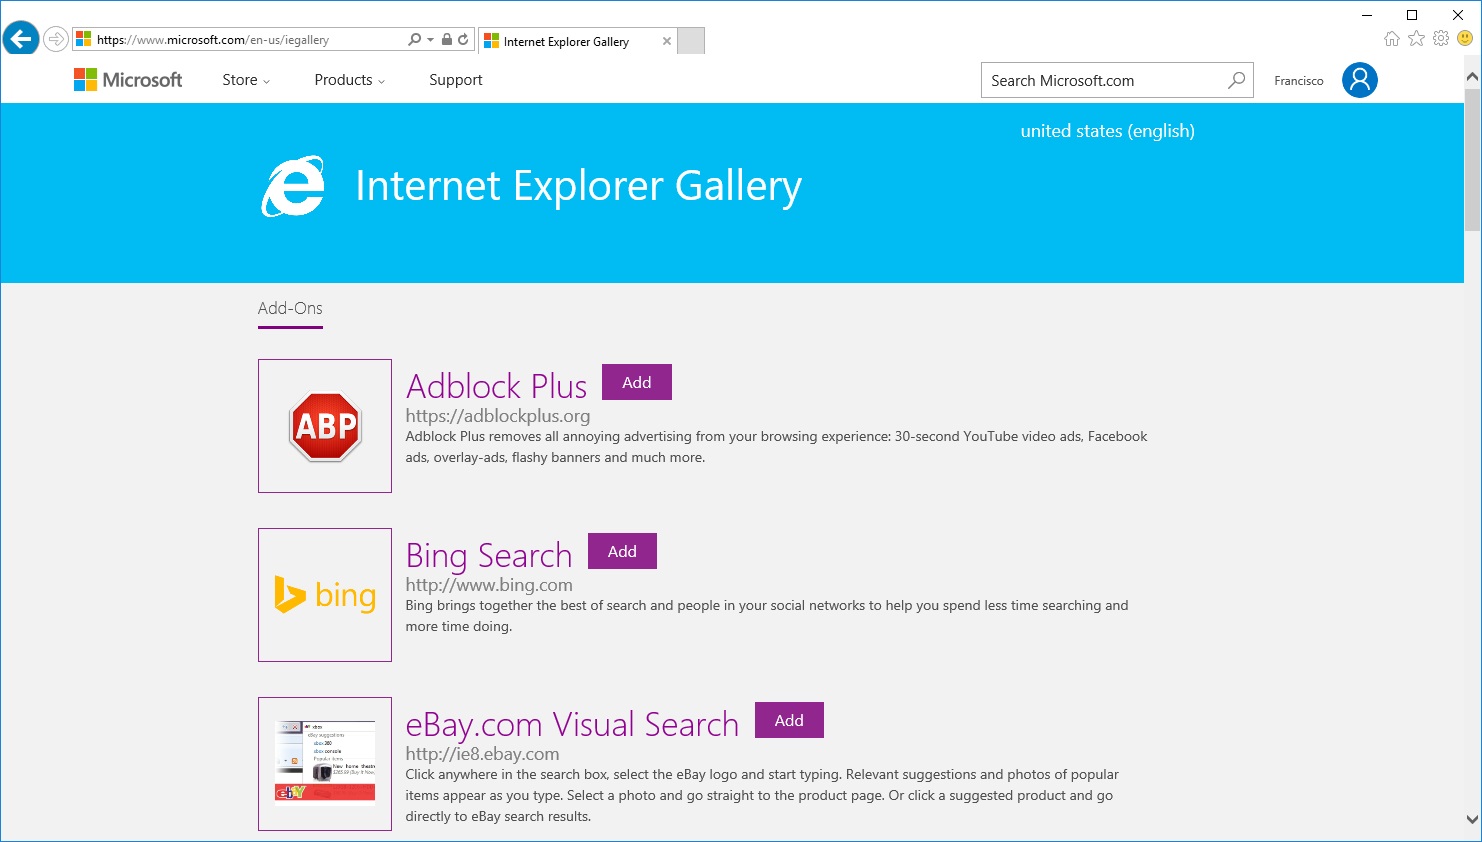 internet explorer 11 free download now now now now